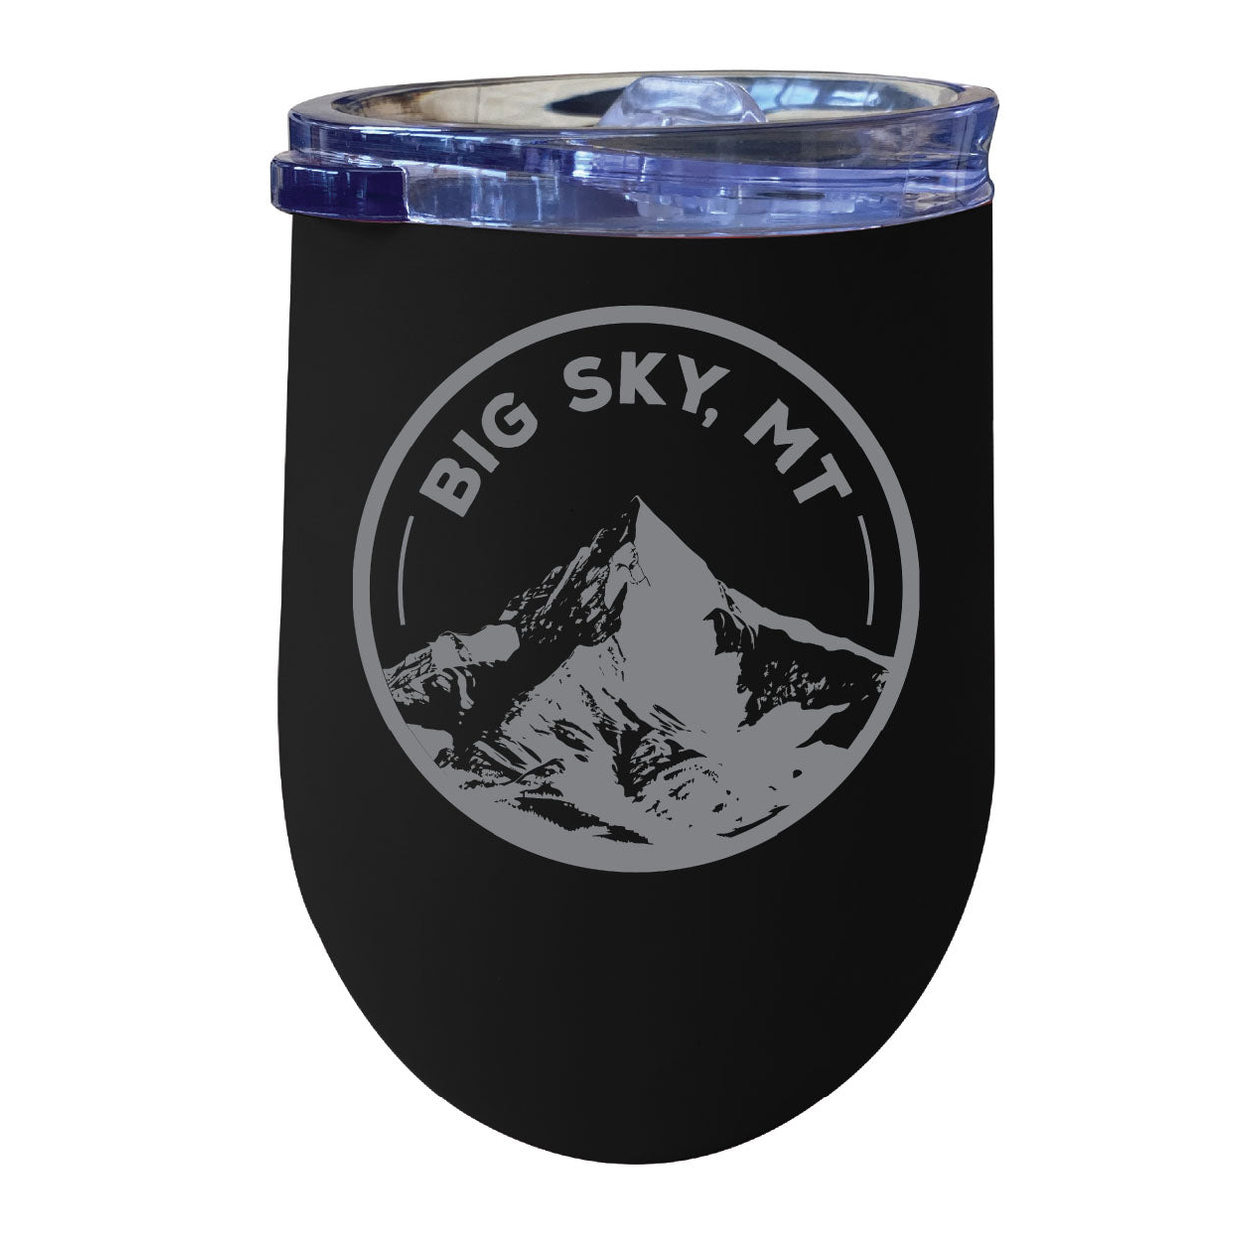 Big Sky Montana Souvenir 12 Oz Engraved Insulated Wine Stainless Steel Tumbler - Black,,4-Pack